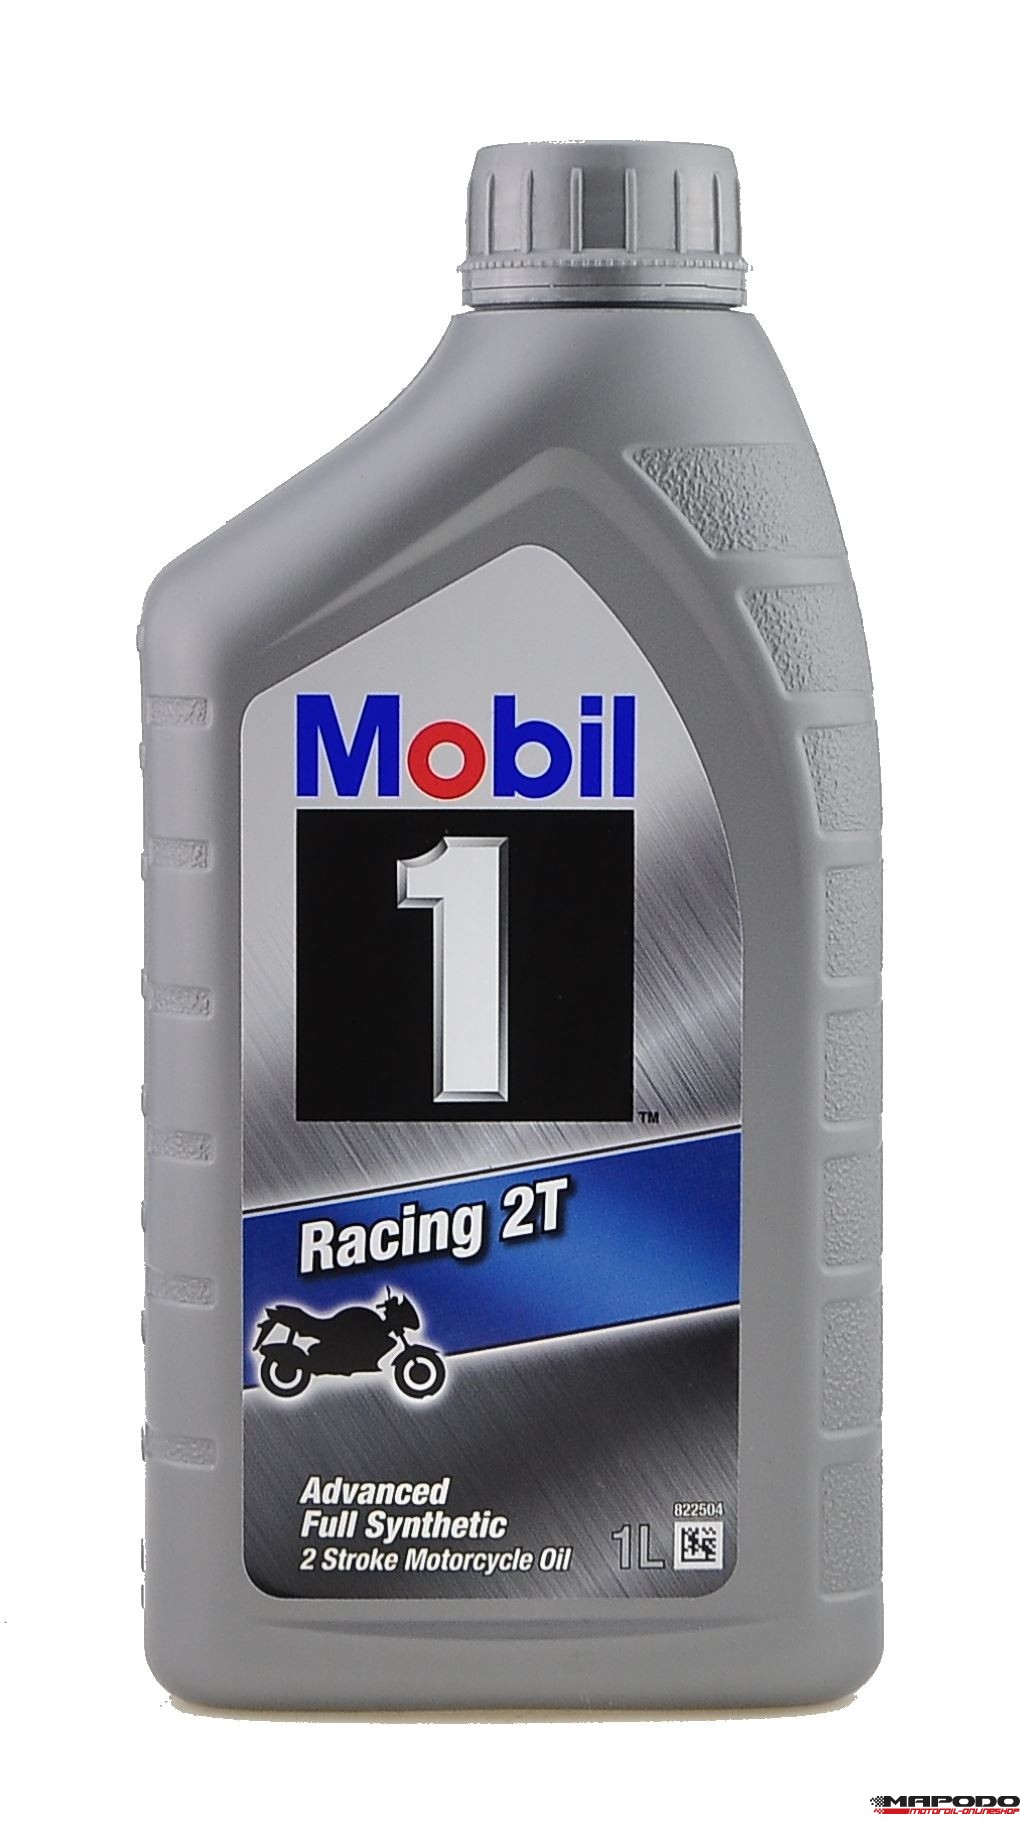 Mobil 1 Racing 4T 10W-40 Fully Synthetic Motorcycle Oil – 1L